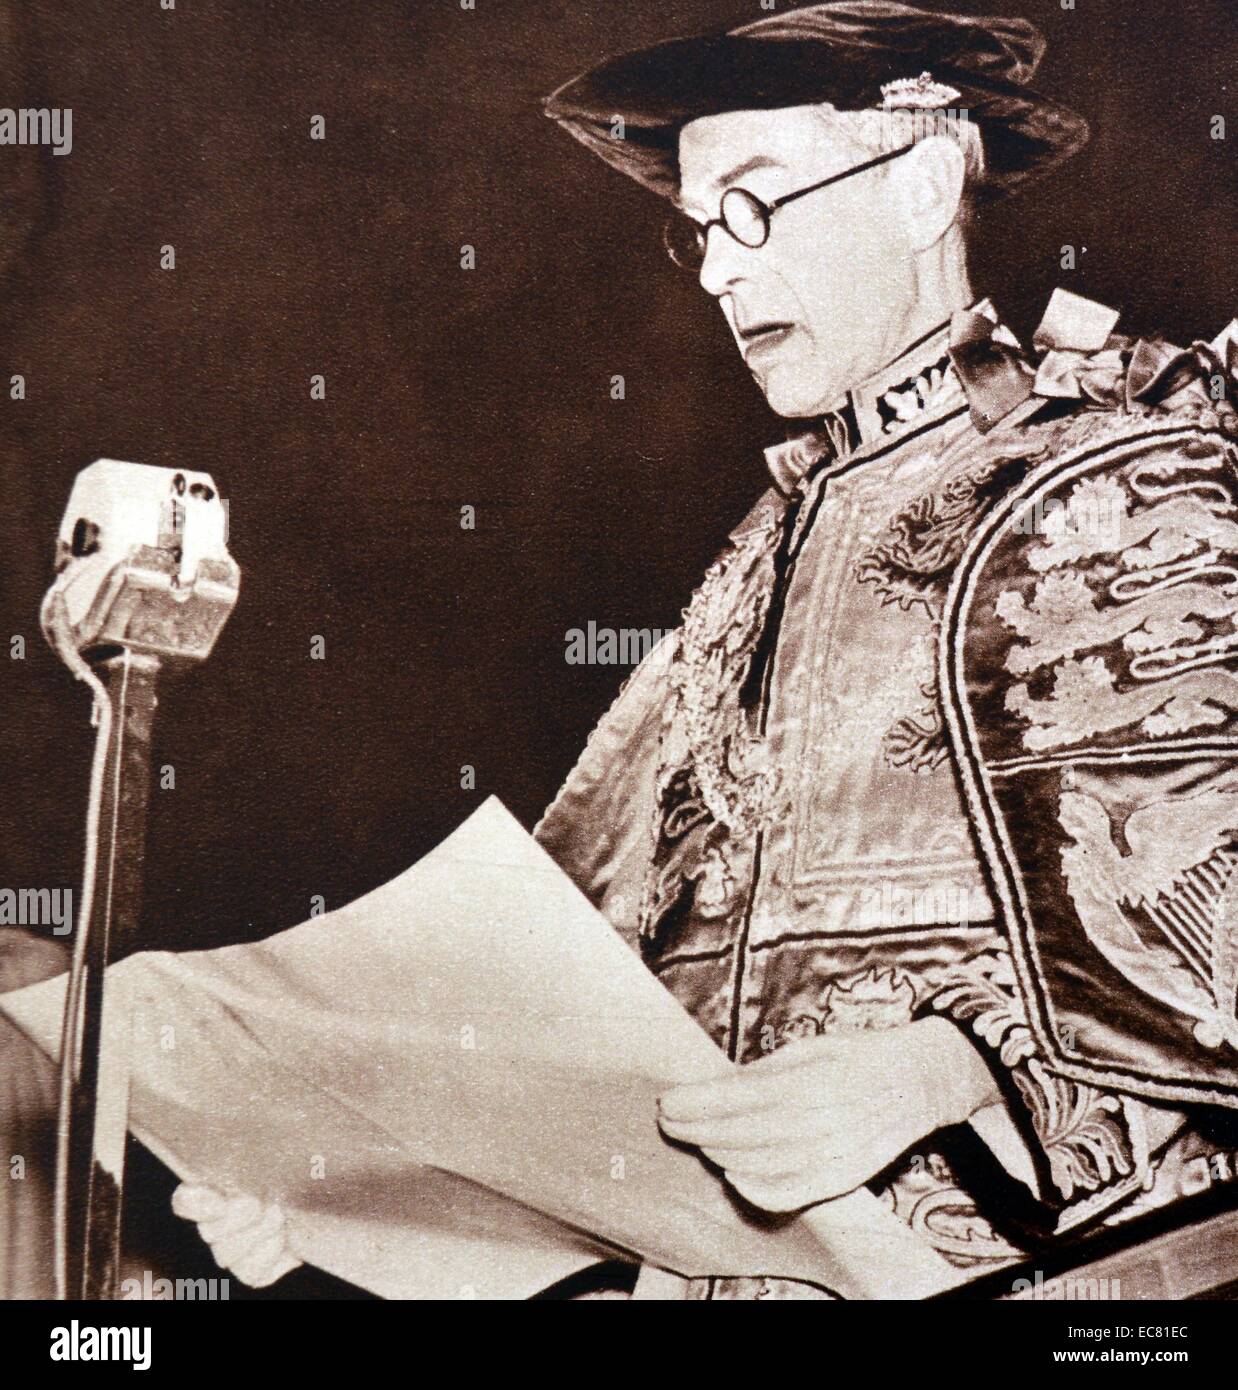 The Offical anouncement of accession of King George VI to the throne of the United Kingdom following the abdication of his brother King Edward VIII. Stock Photo